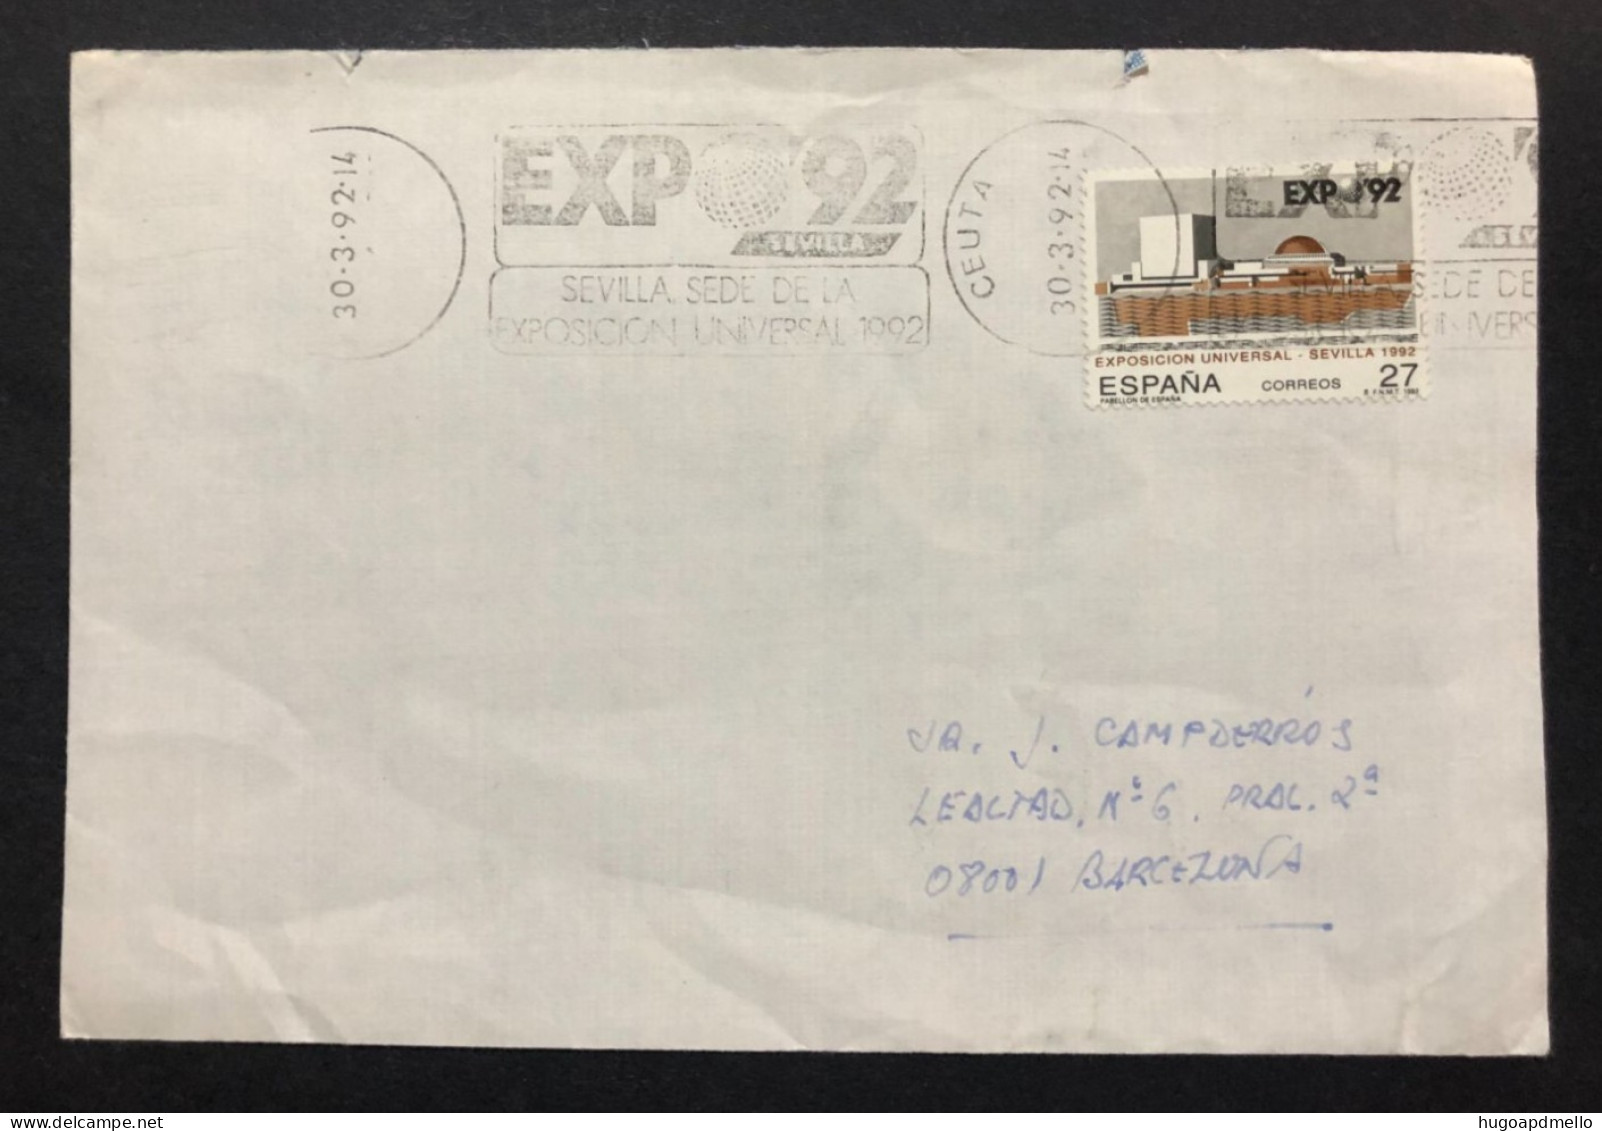 SPAIN, Cover With Special Cancellation « EXPO '92 », « CEUTA Postmark », 1992 - 1992 – Sevilla (Spanien)